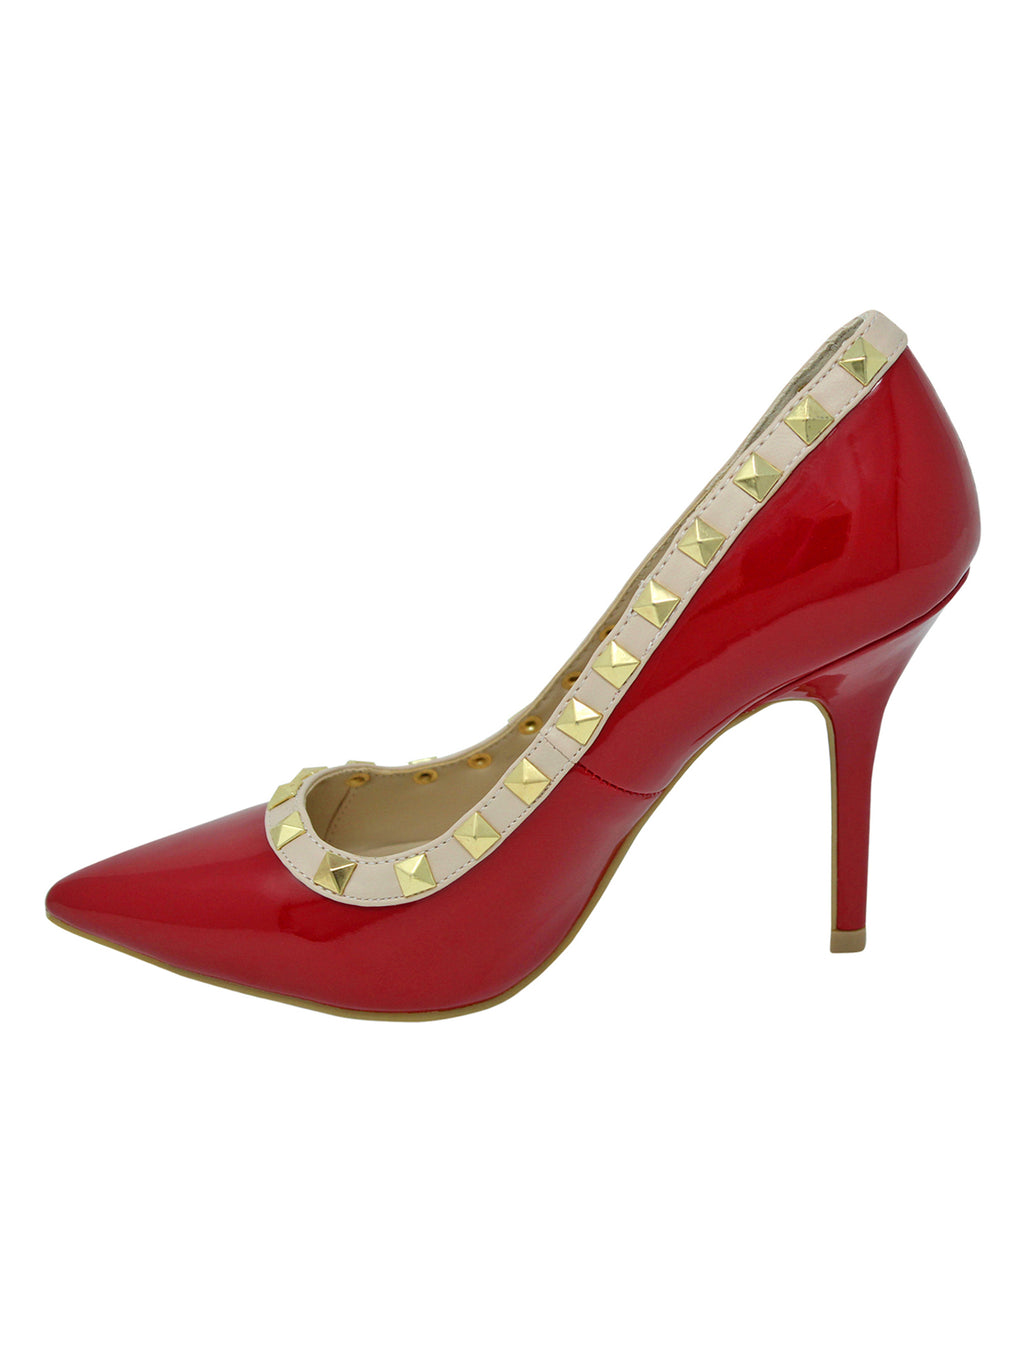 Womens Red Patent Leather Pumps With Gold Studs